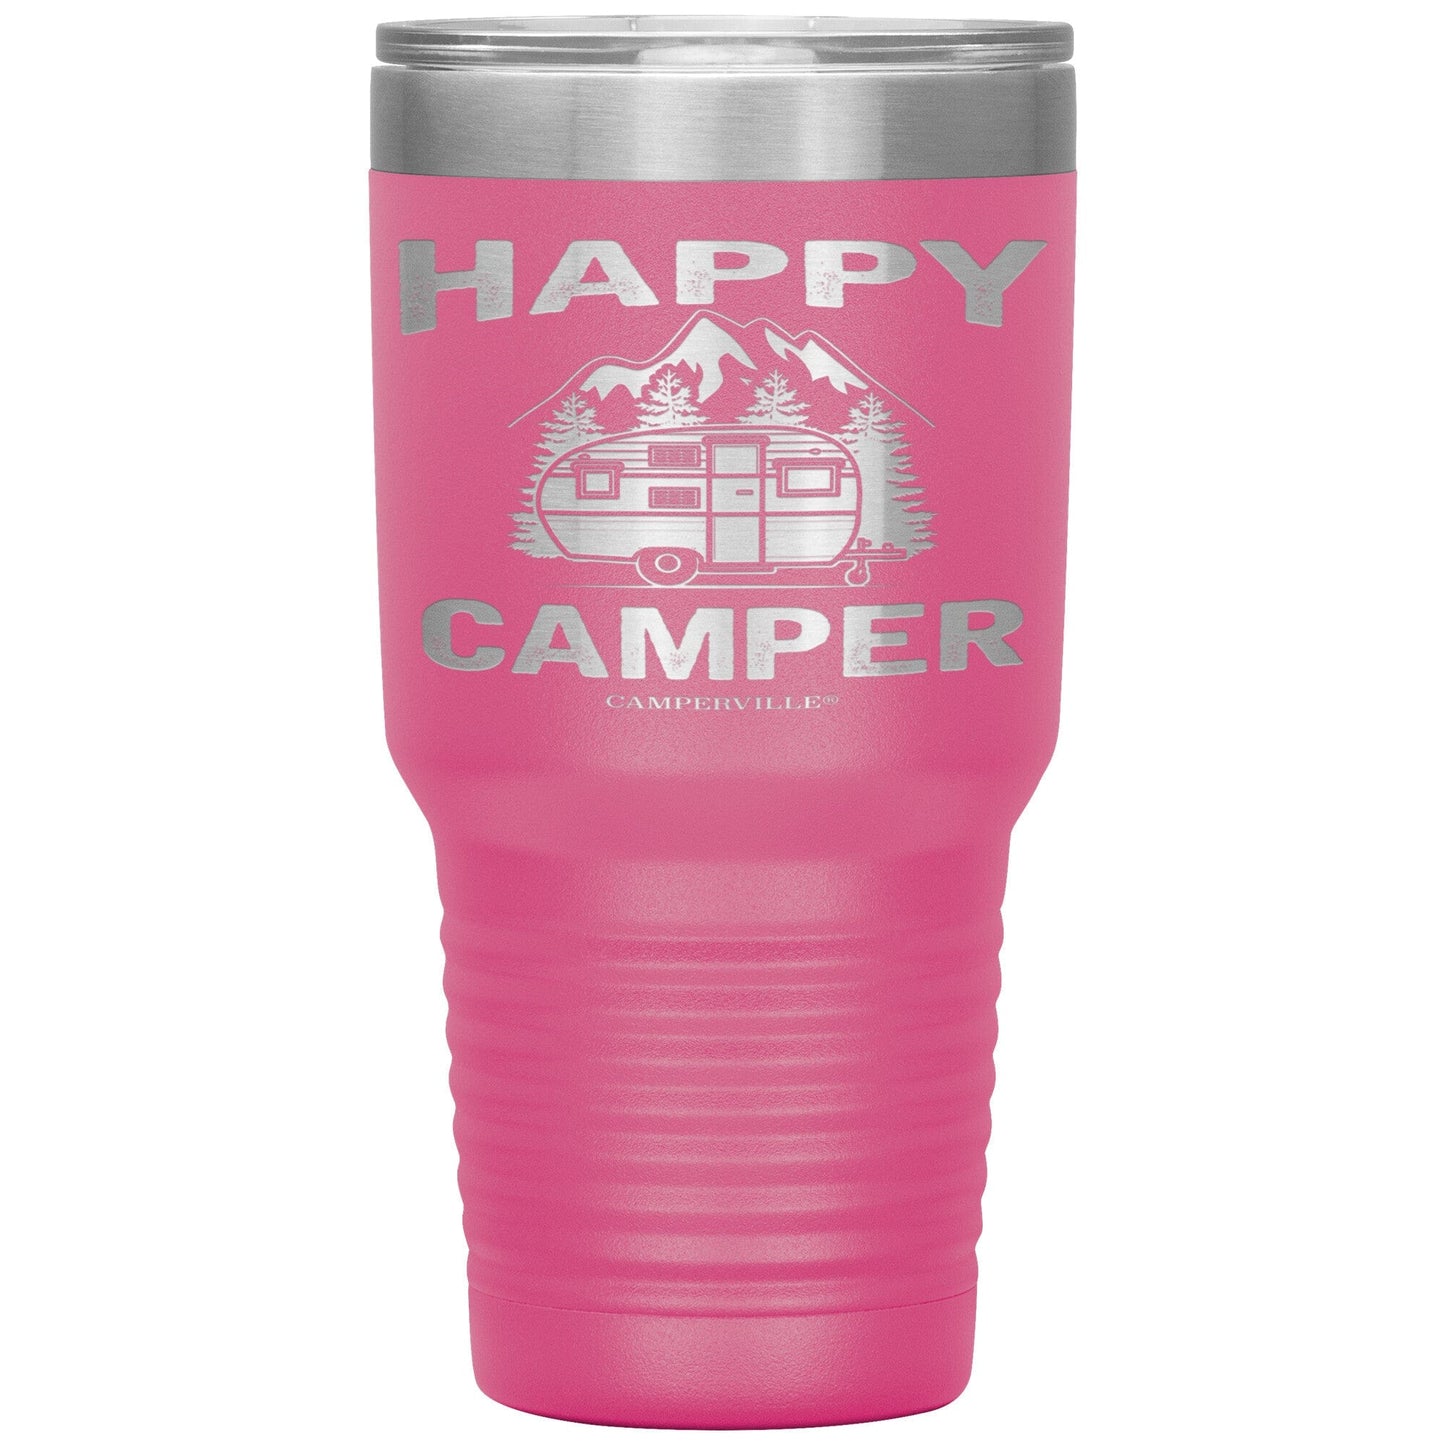 "Happy Camper" Stainless Steel Tumbler